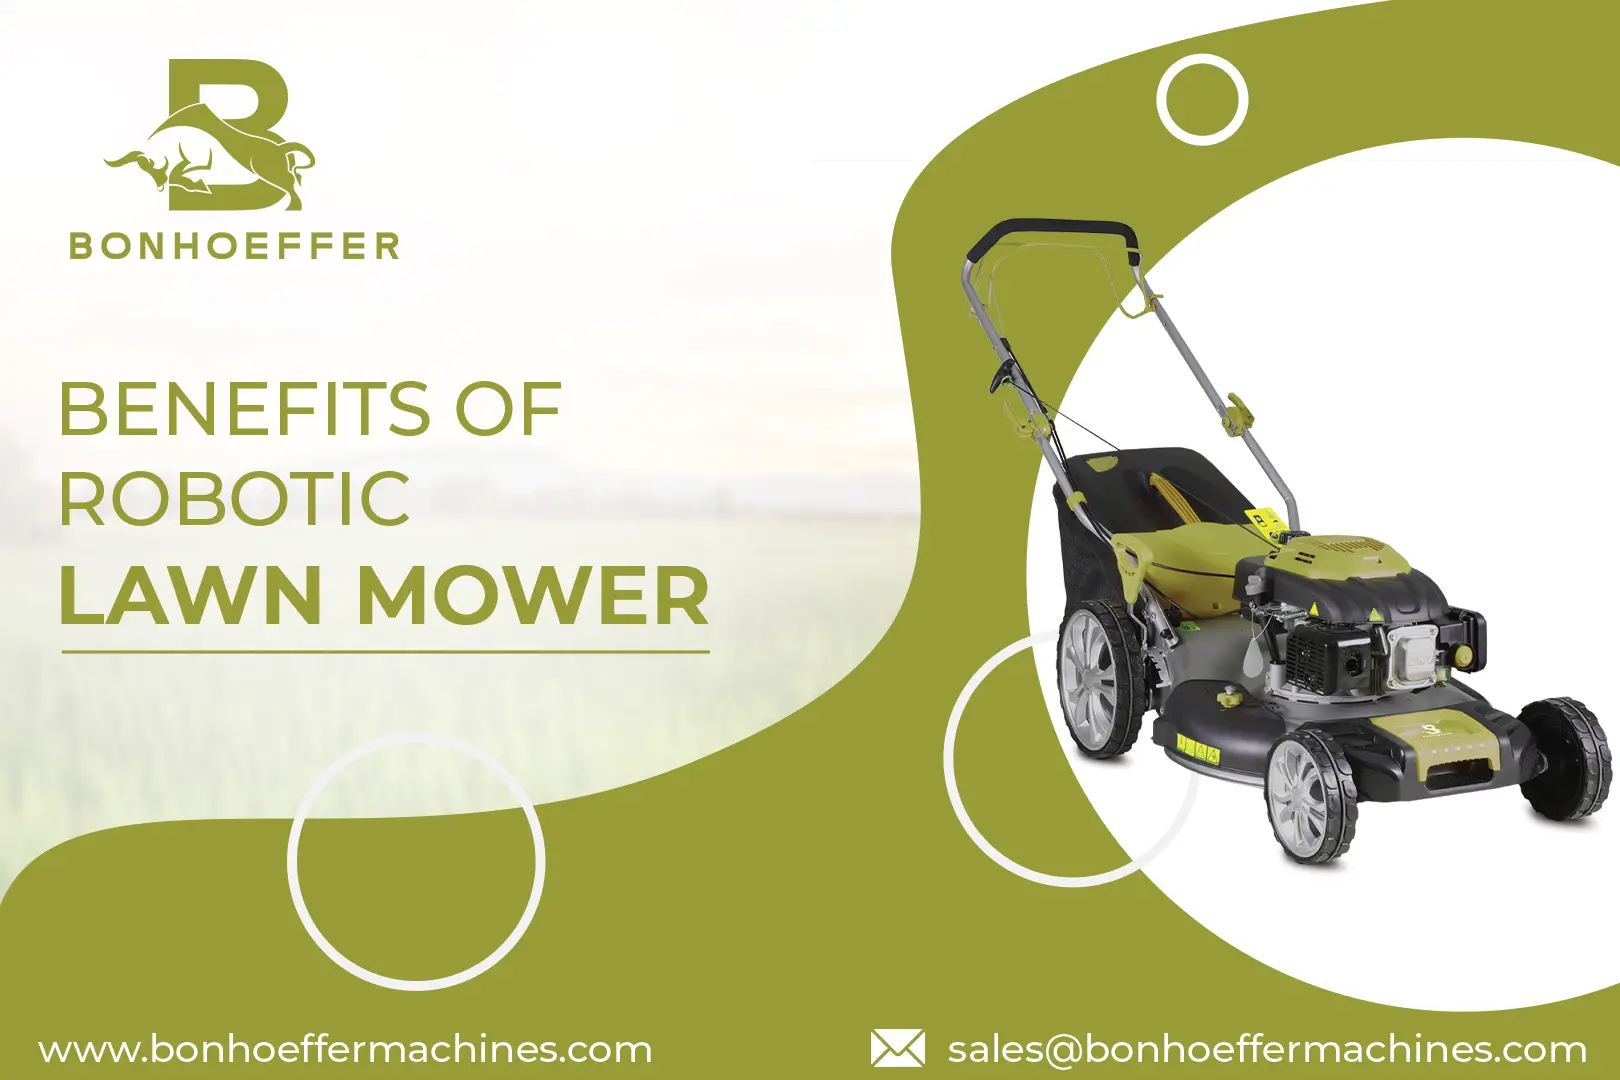 8 Benefits of a Robotic Lawn Mower